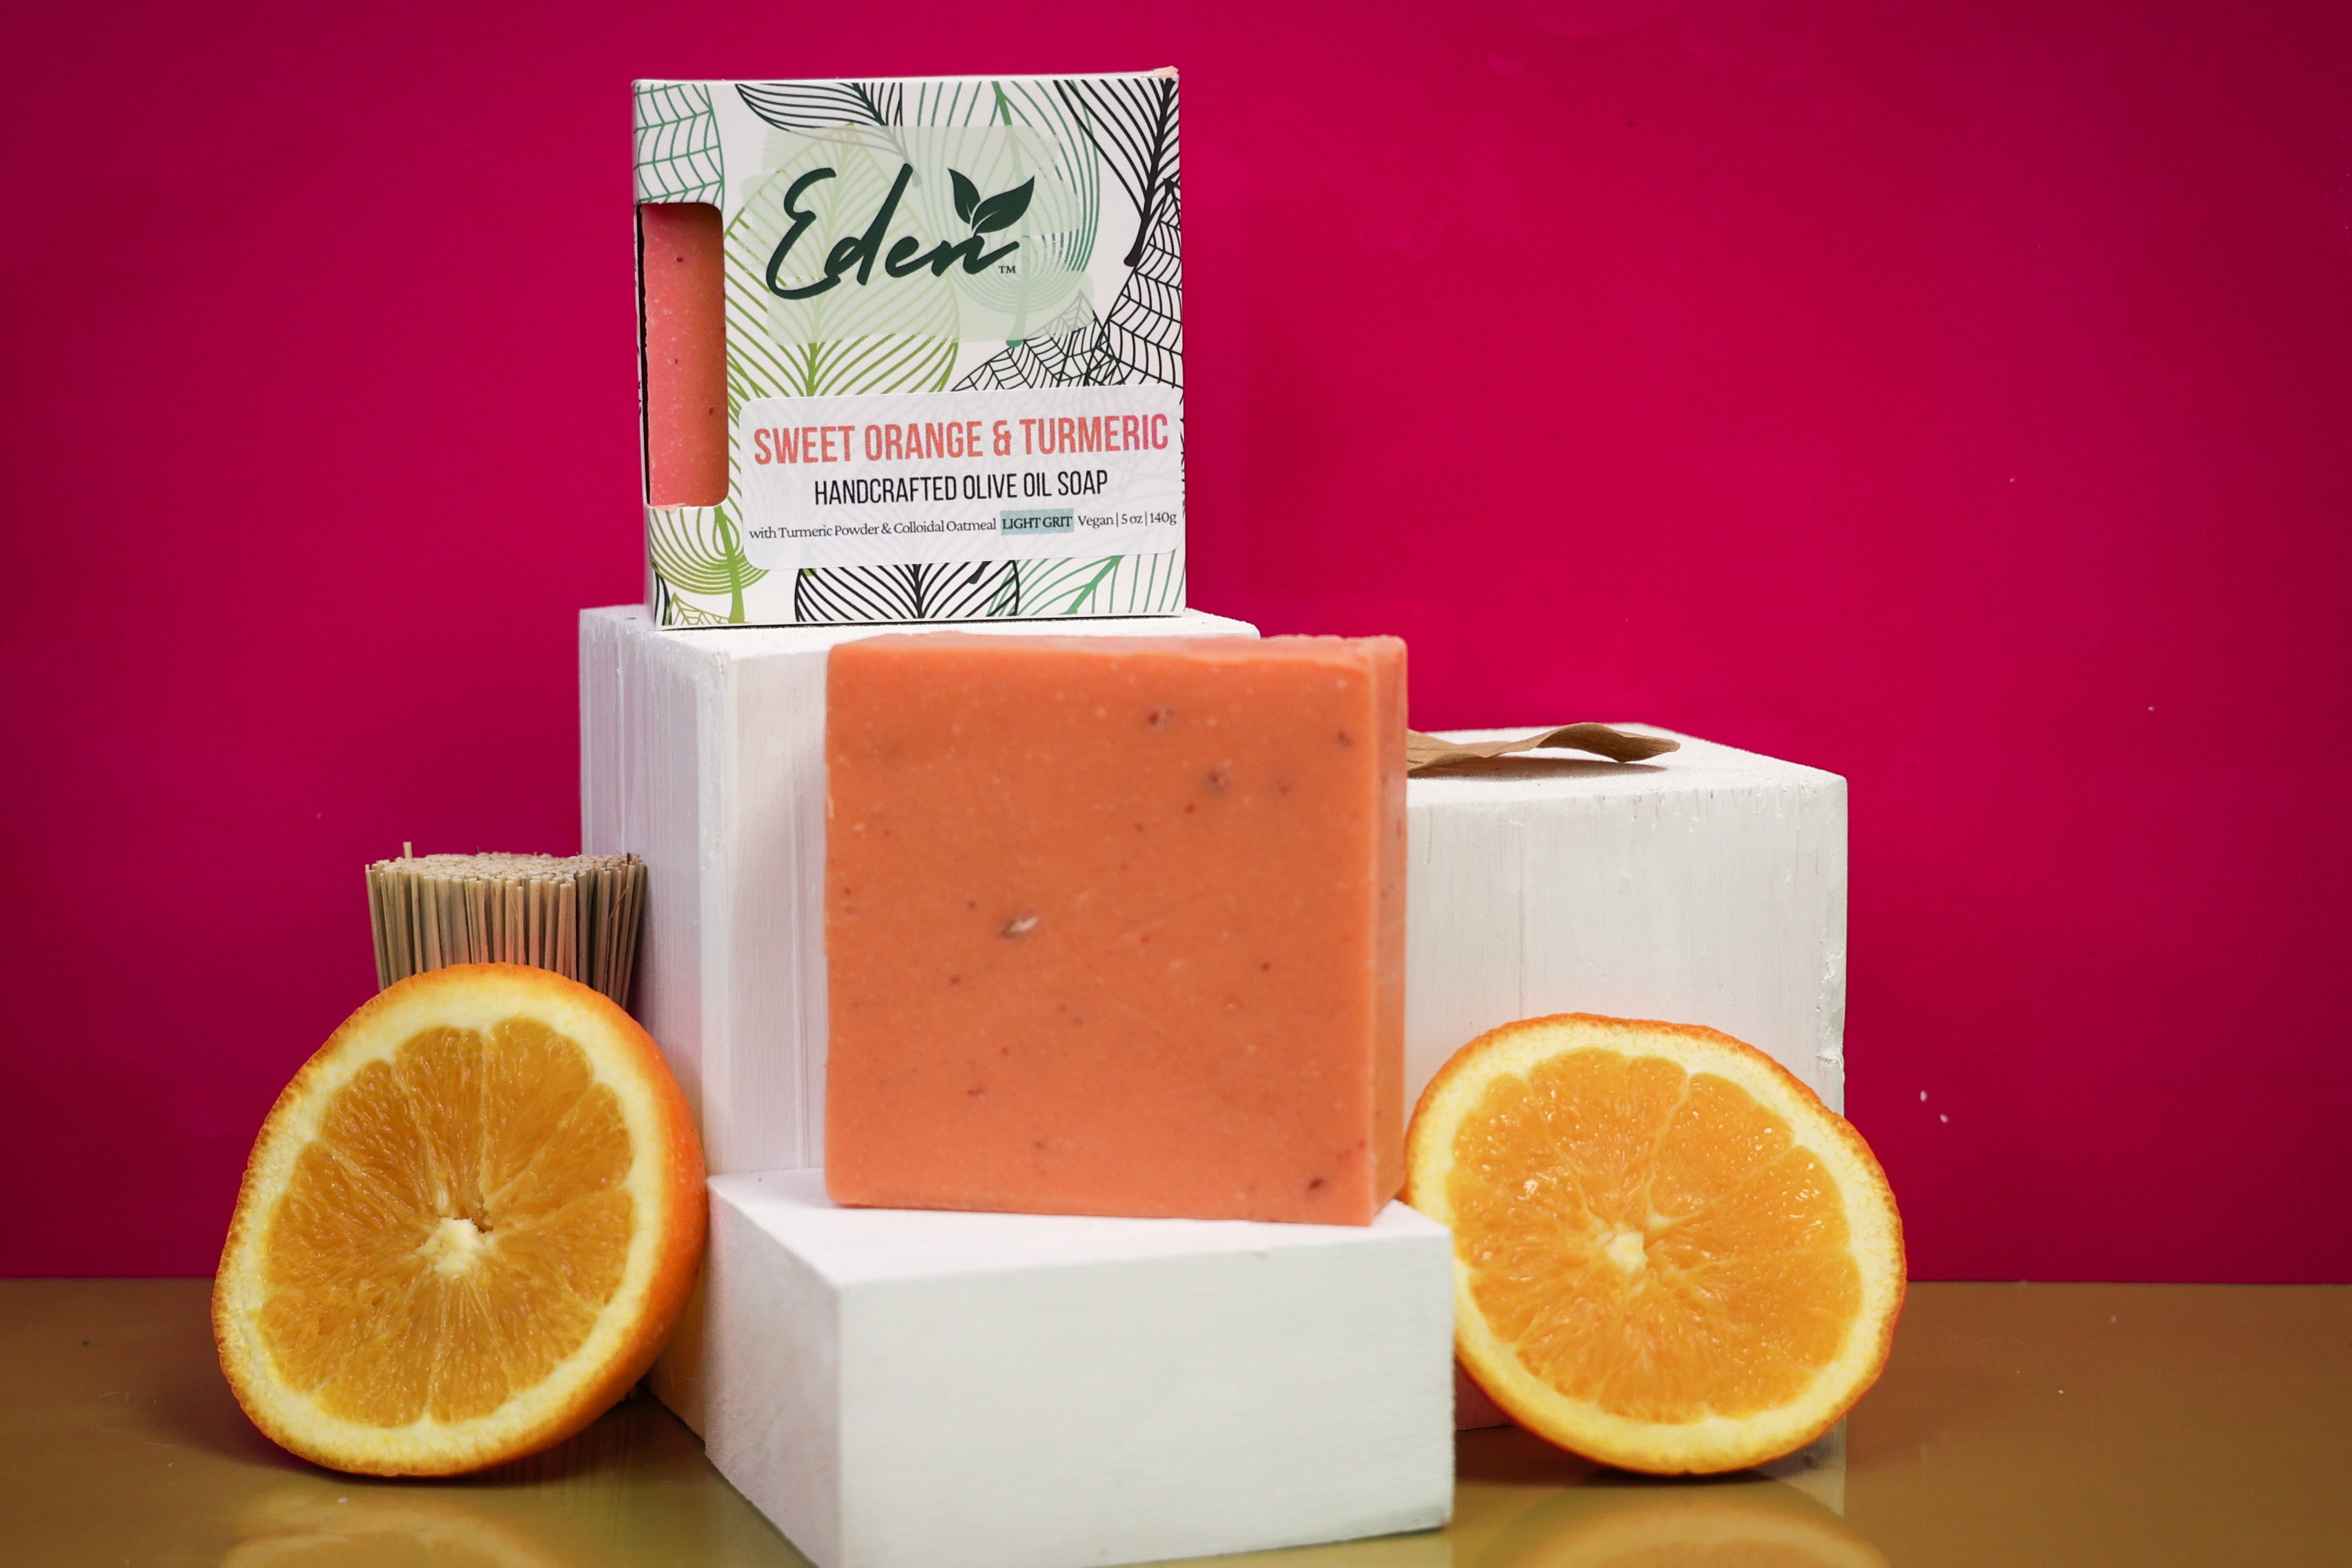 BITTER ORANGE – Soap Naturally Magnificent